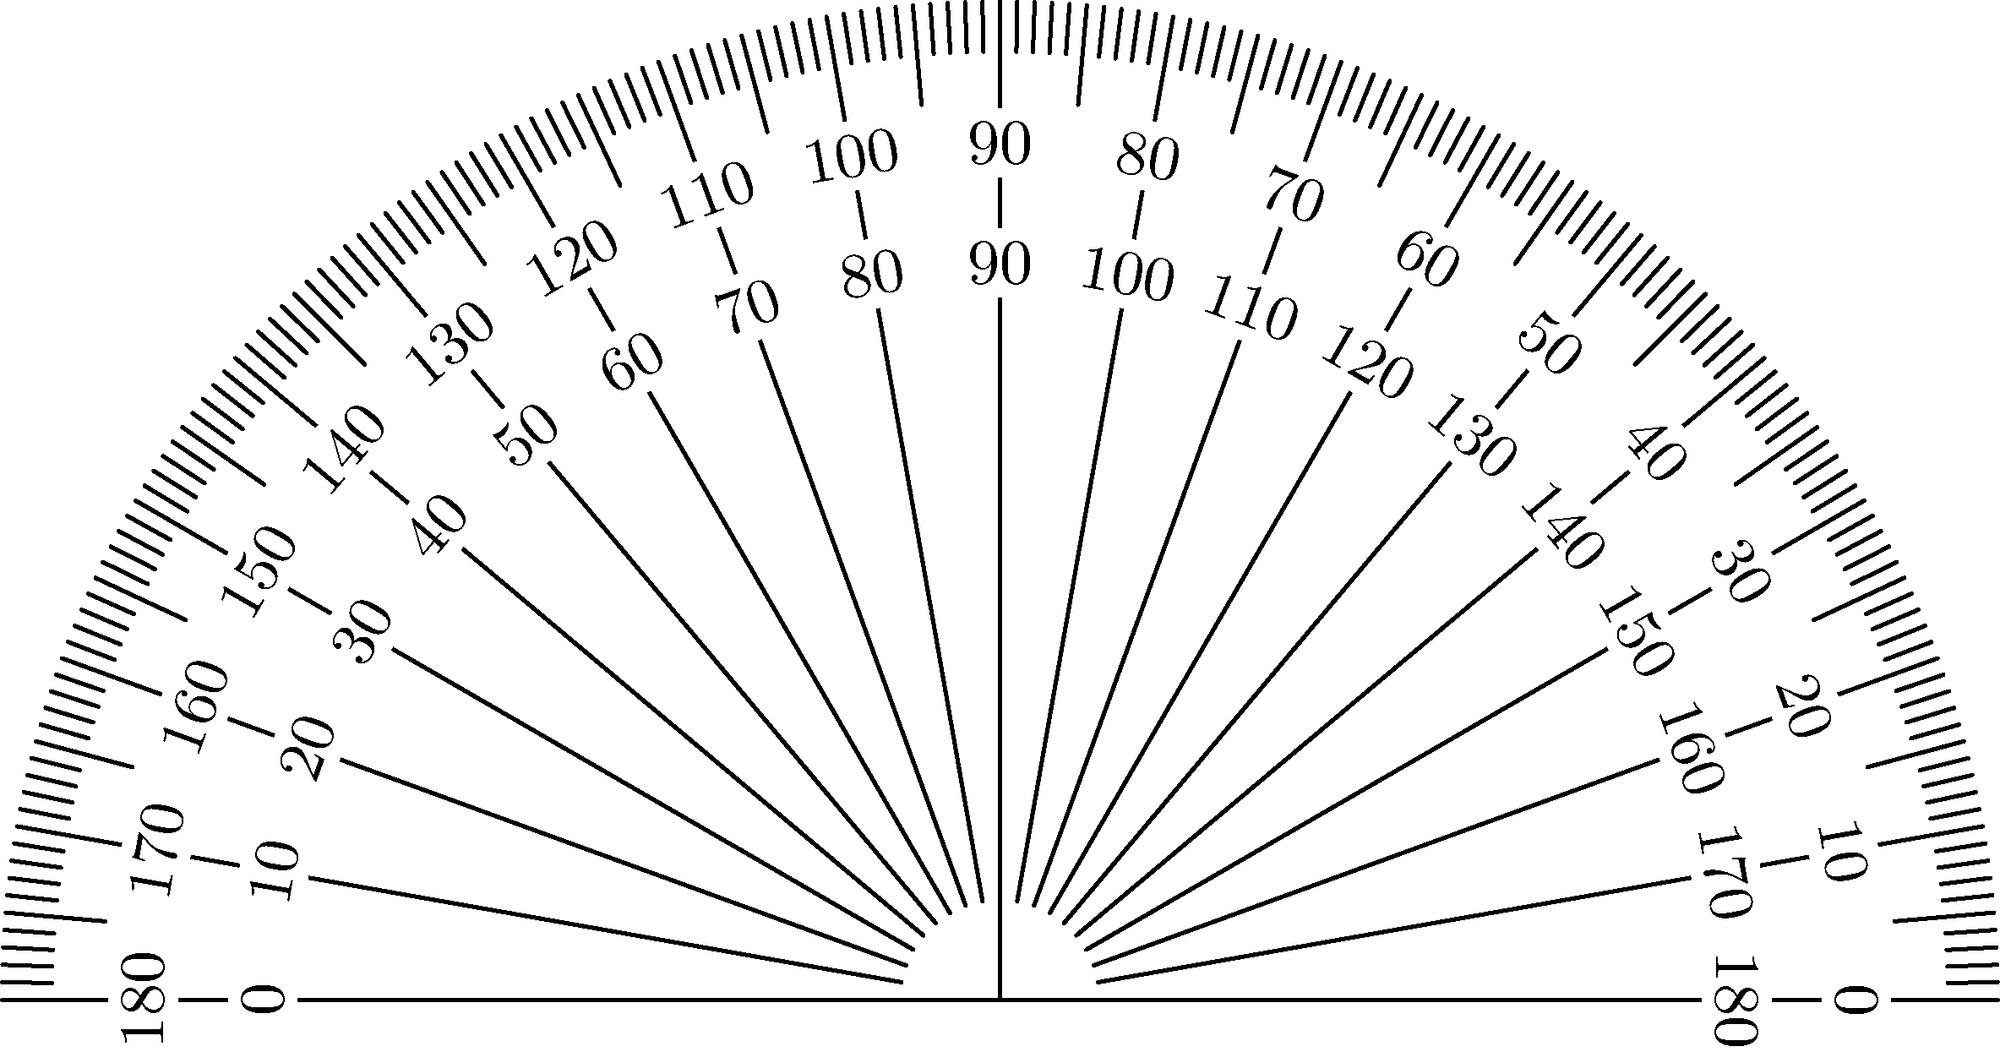 How to Use a Protractor?